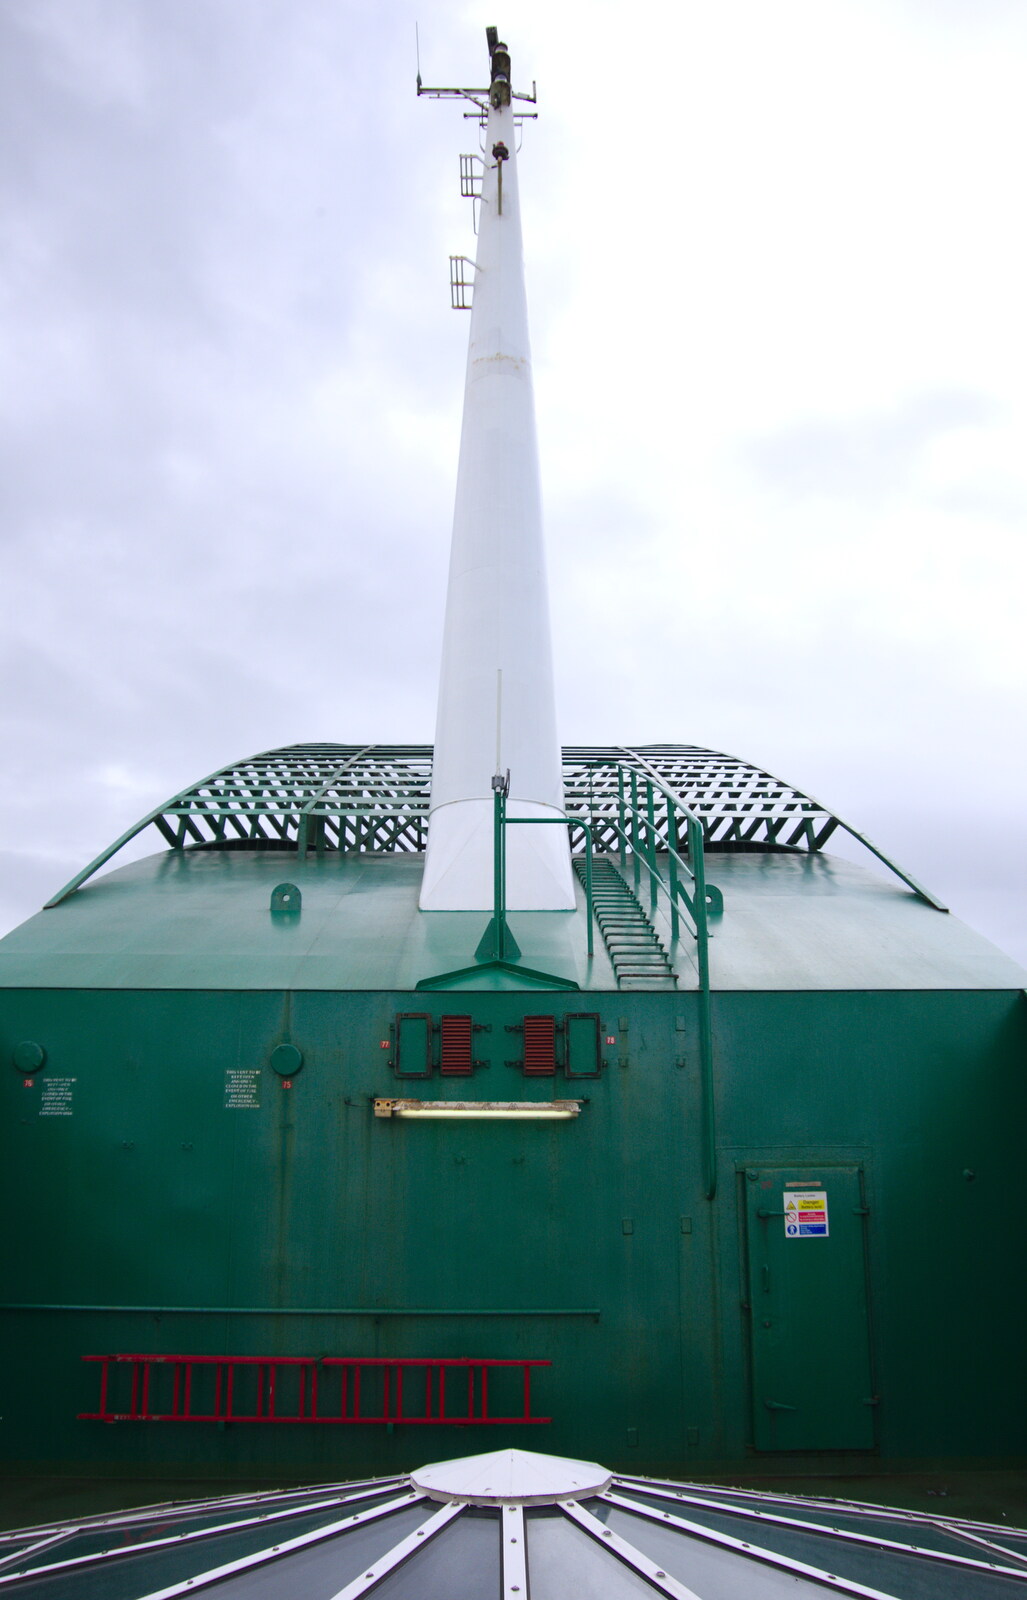 The ferry's token mast from The Summer Trip to Ireland, Monkstown, Co. Dublin, Ireland - 9th August 2019